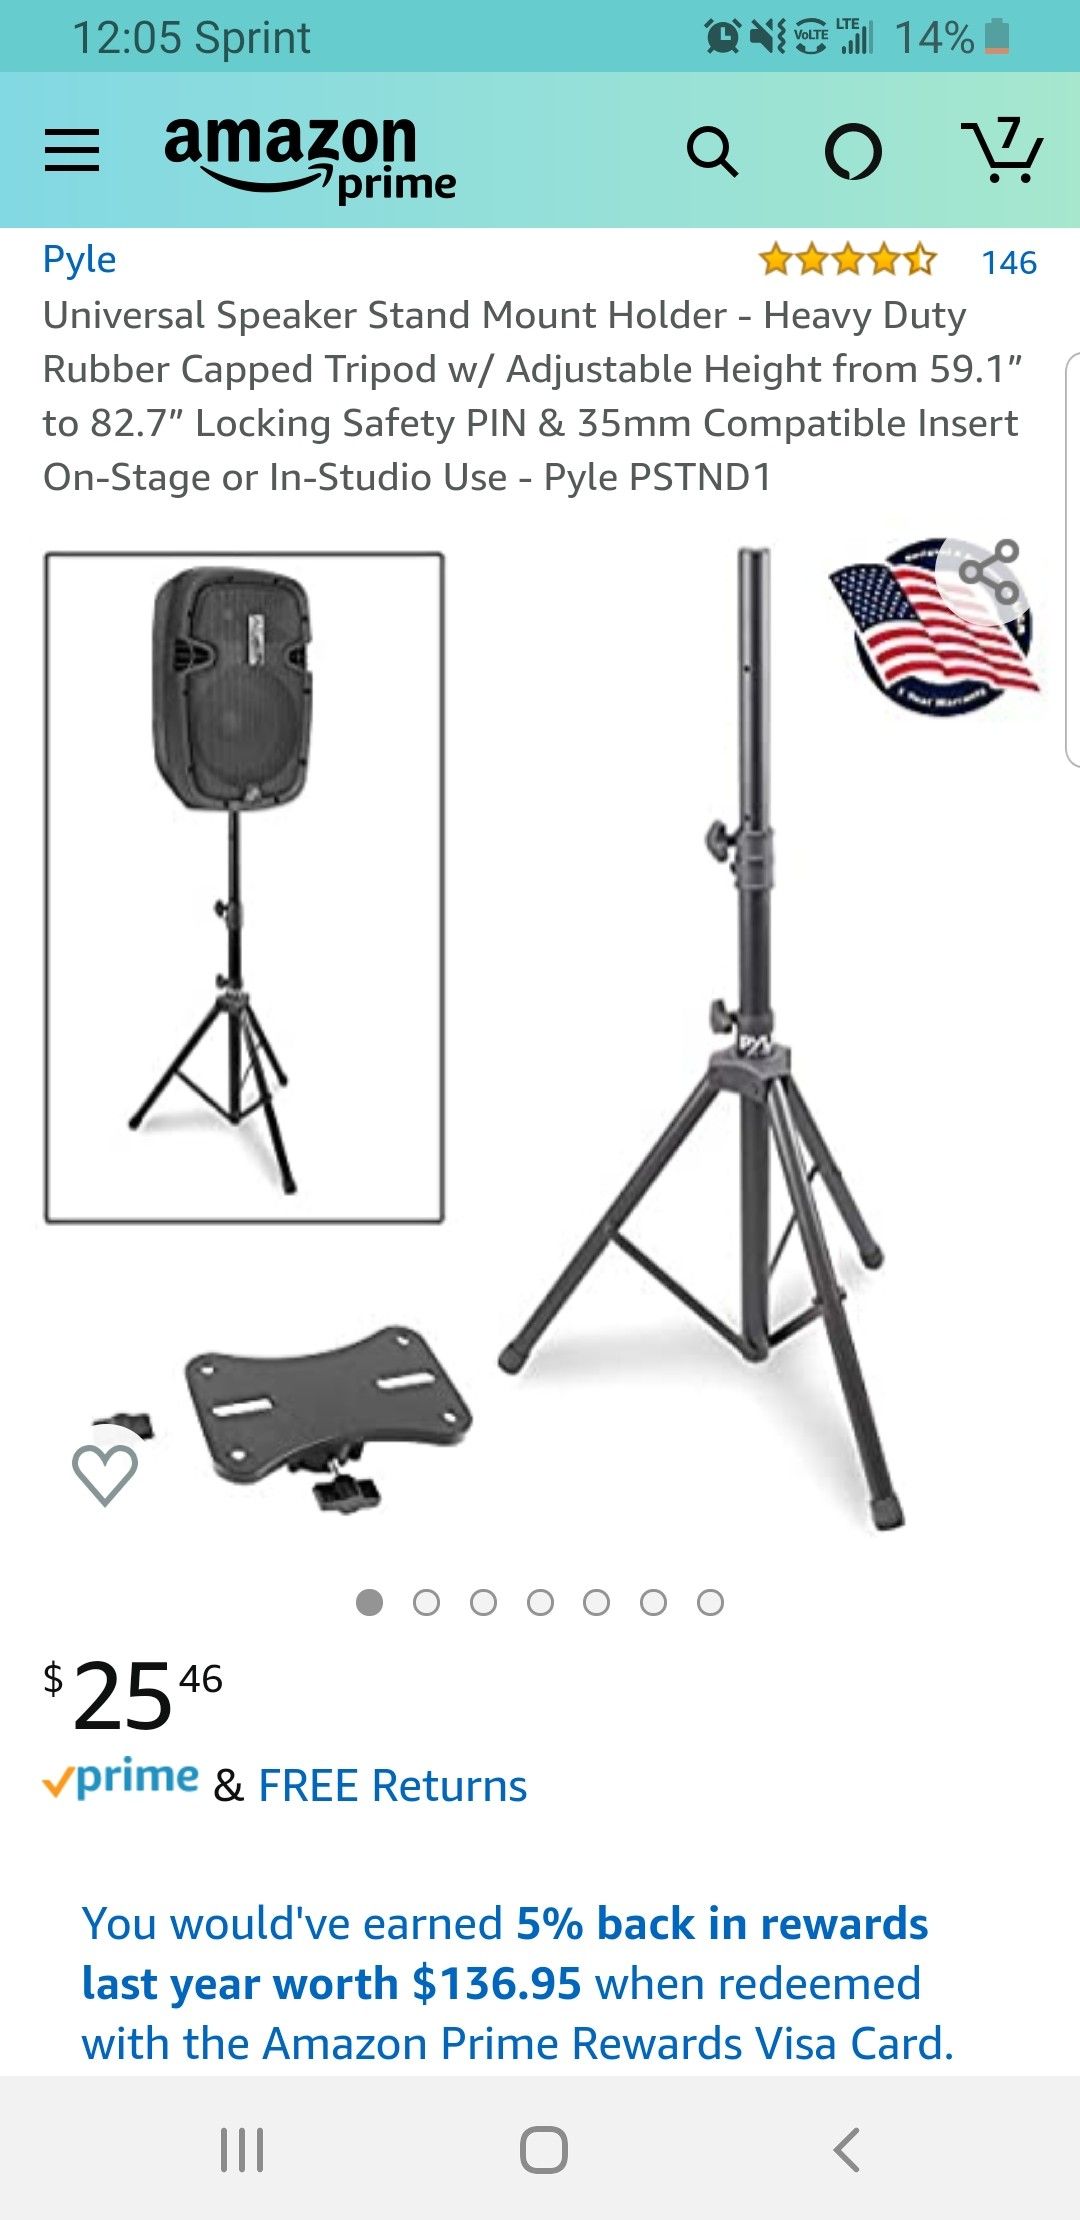 Universal Speaker Stand Mount Holder - Heavy Duty Rubber Capped Tripod w/ Adjustable Height from 59.1” to 82.7” TRIPOD ONLY